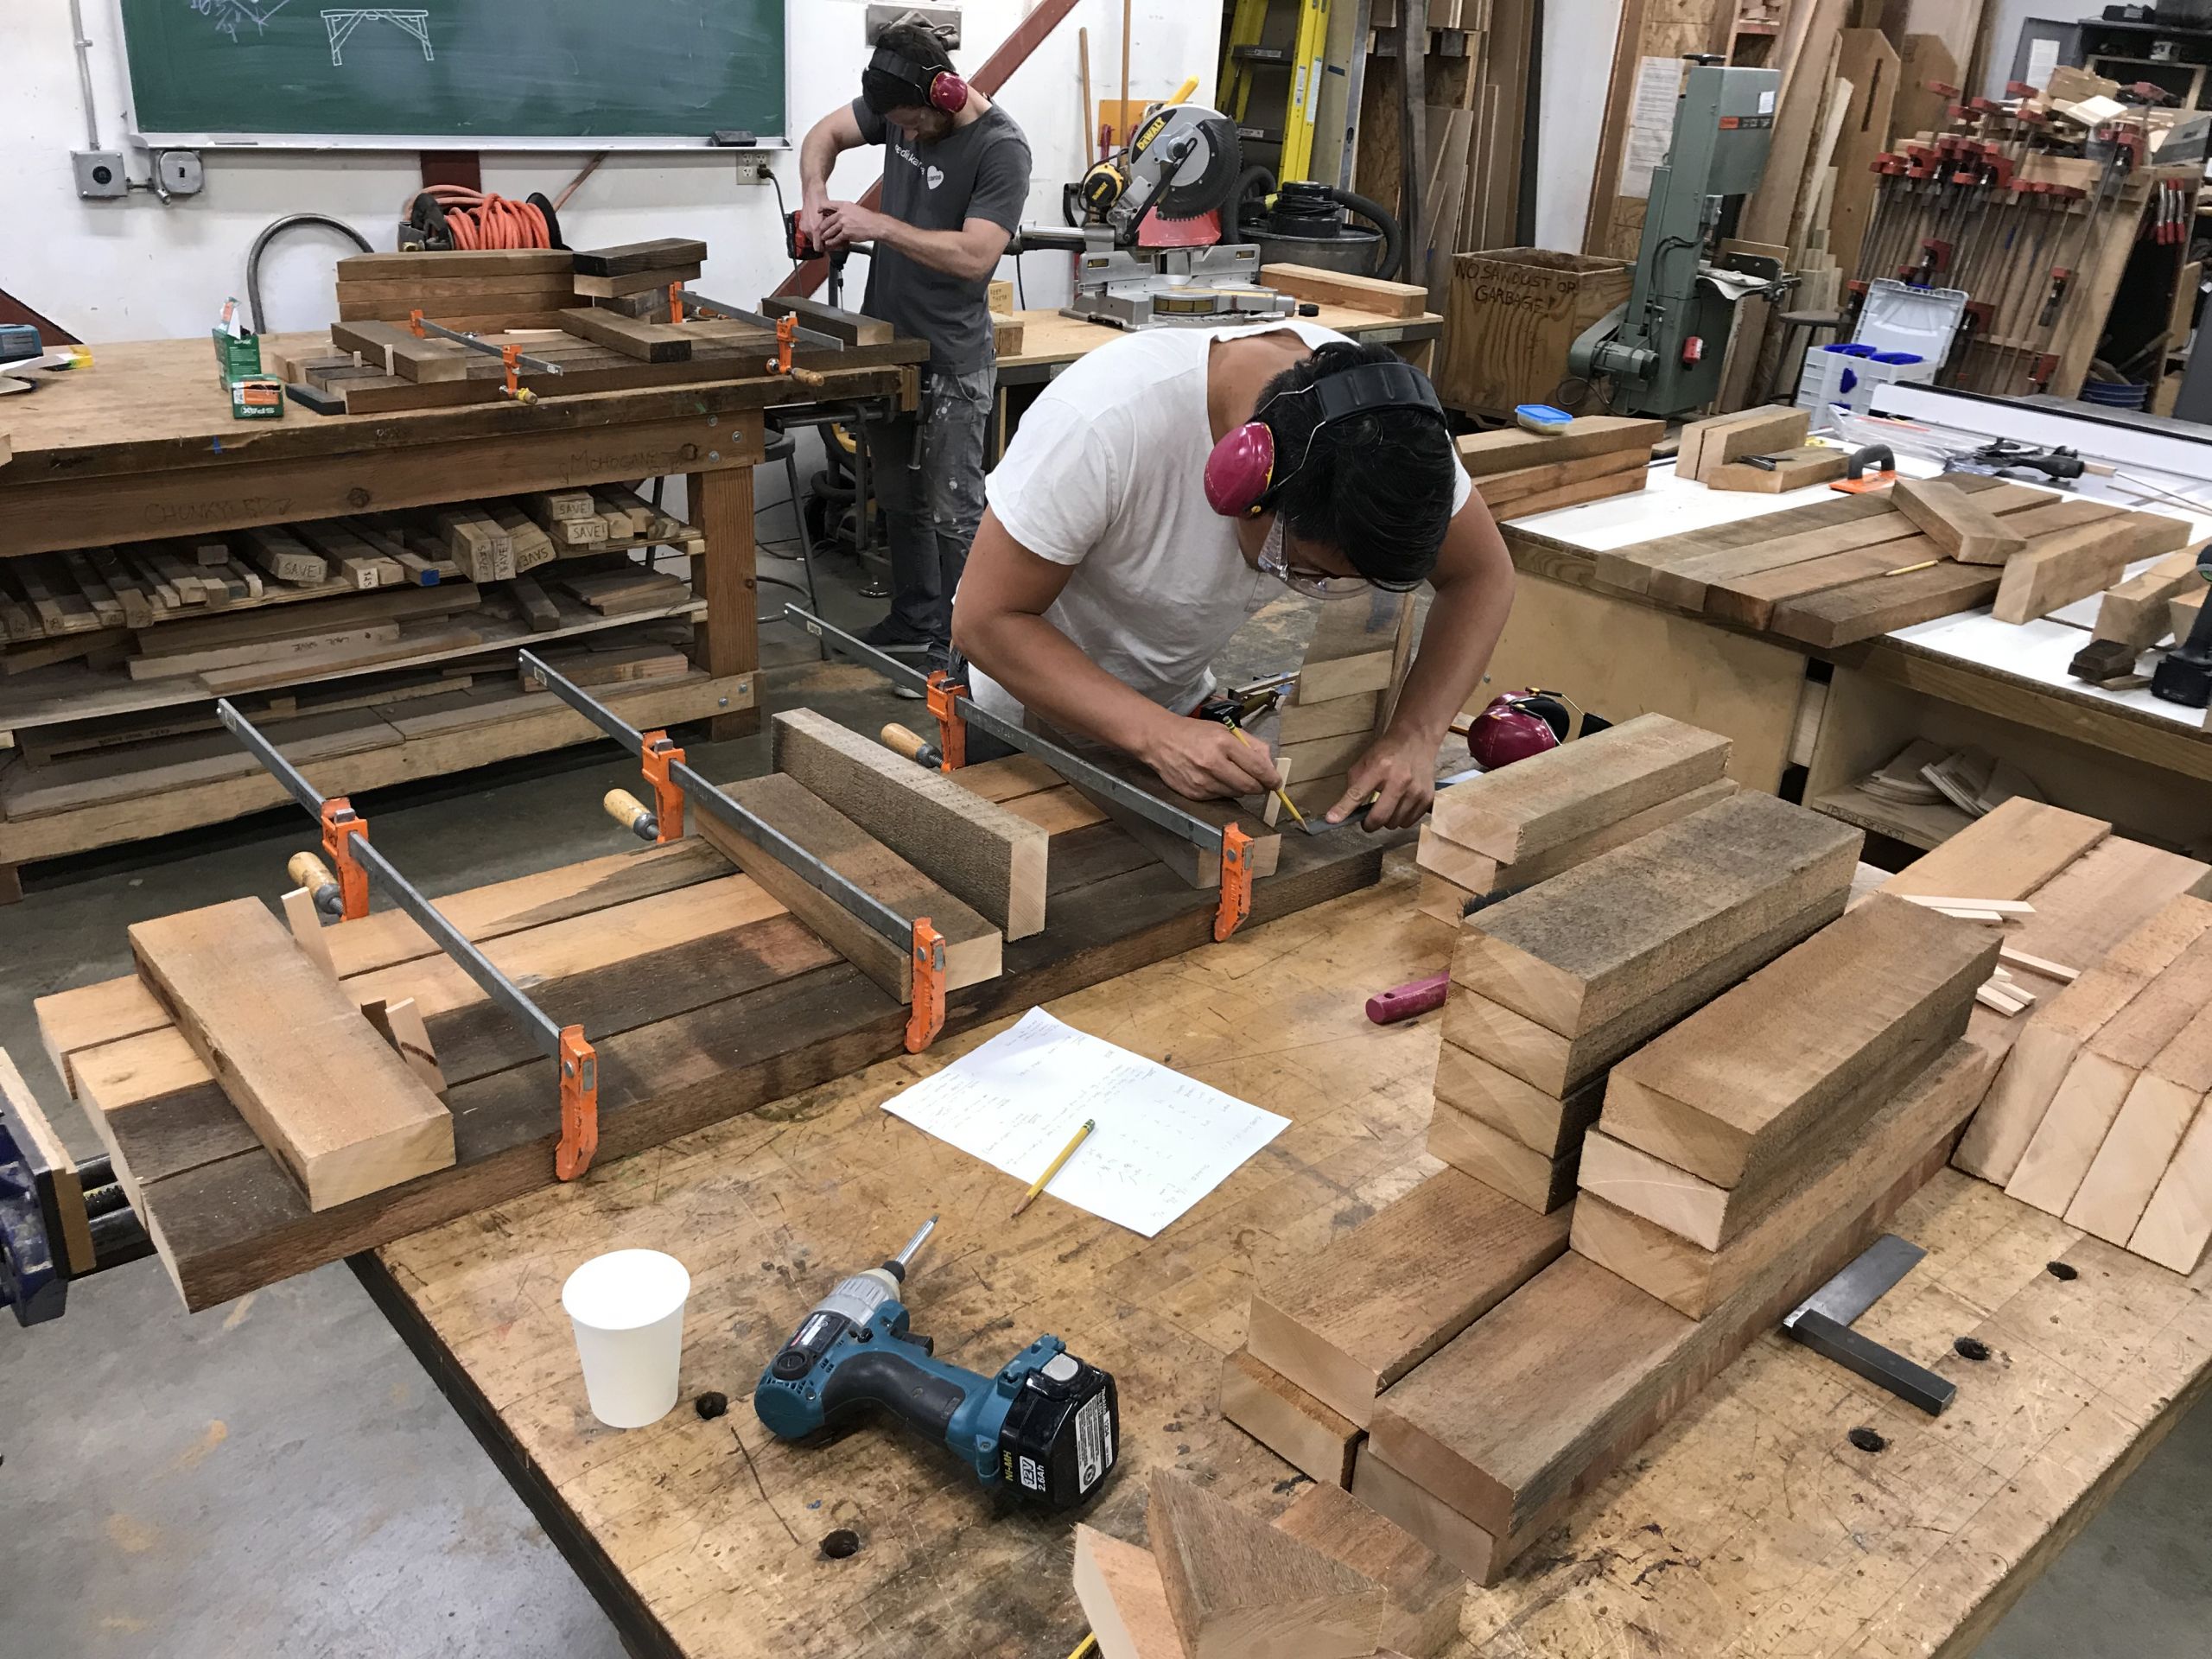 Woodworking 101